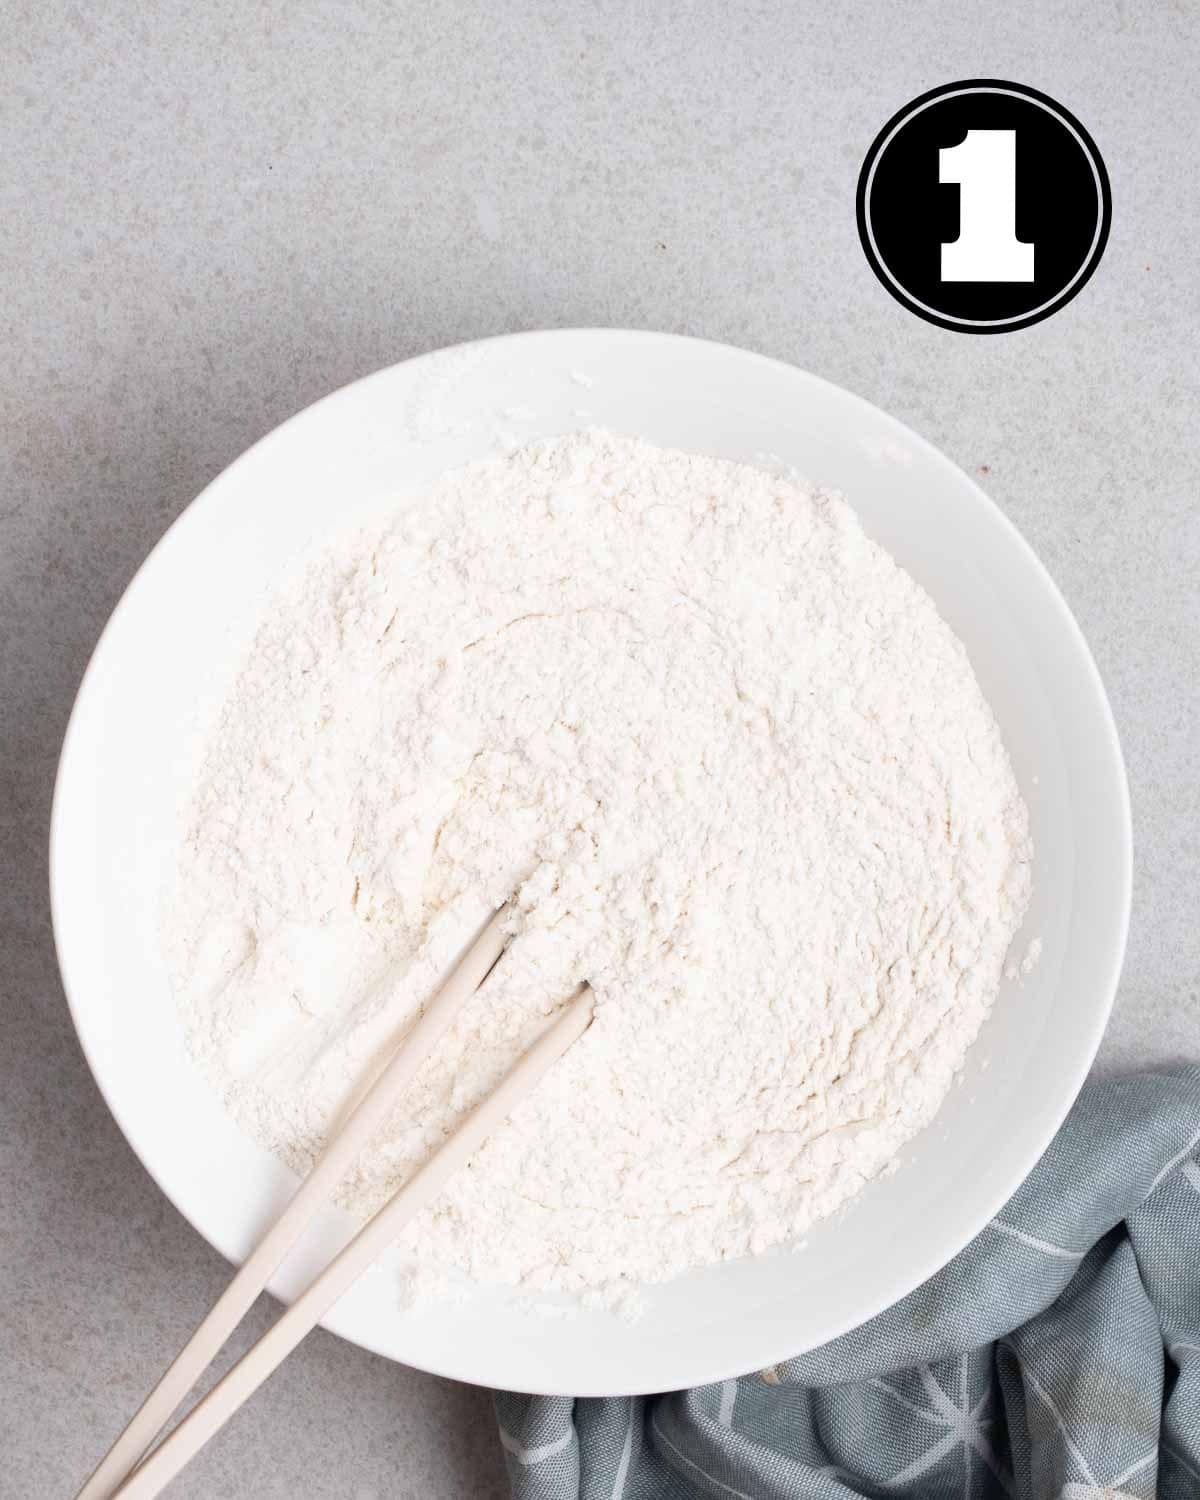 Flour and salt in a bowl with a pair of chopsticks beside.